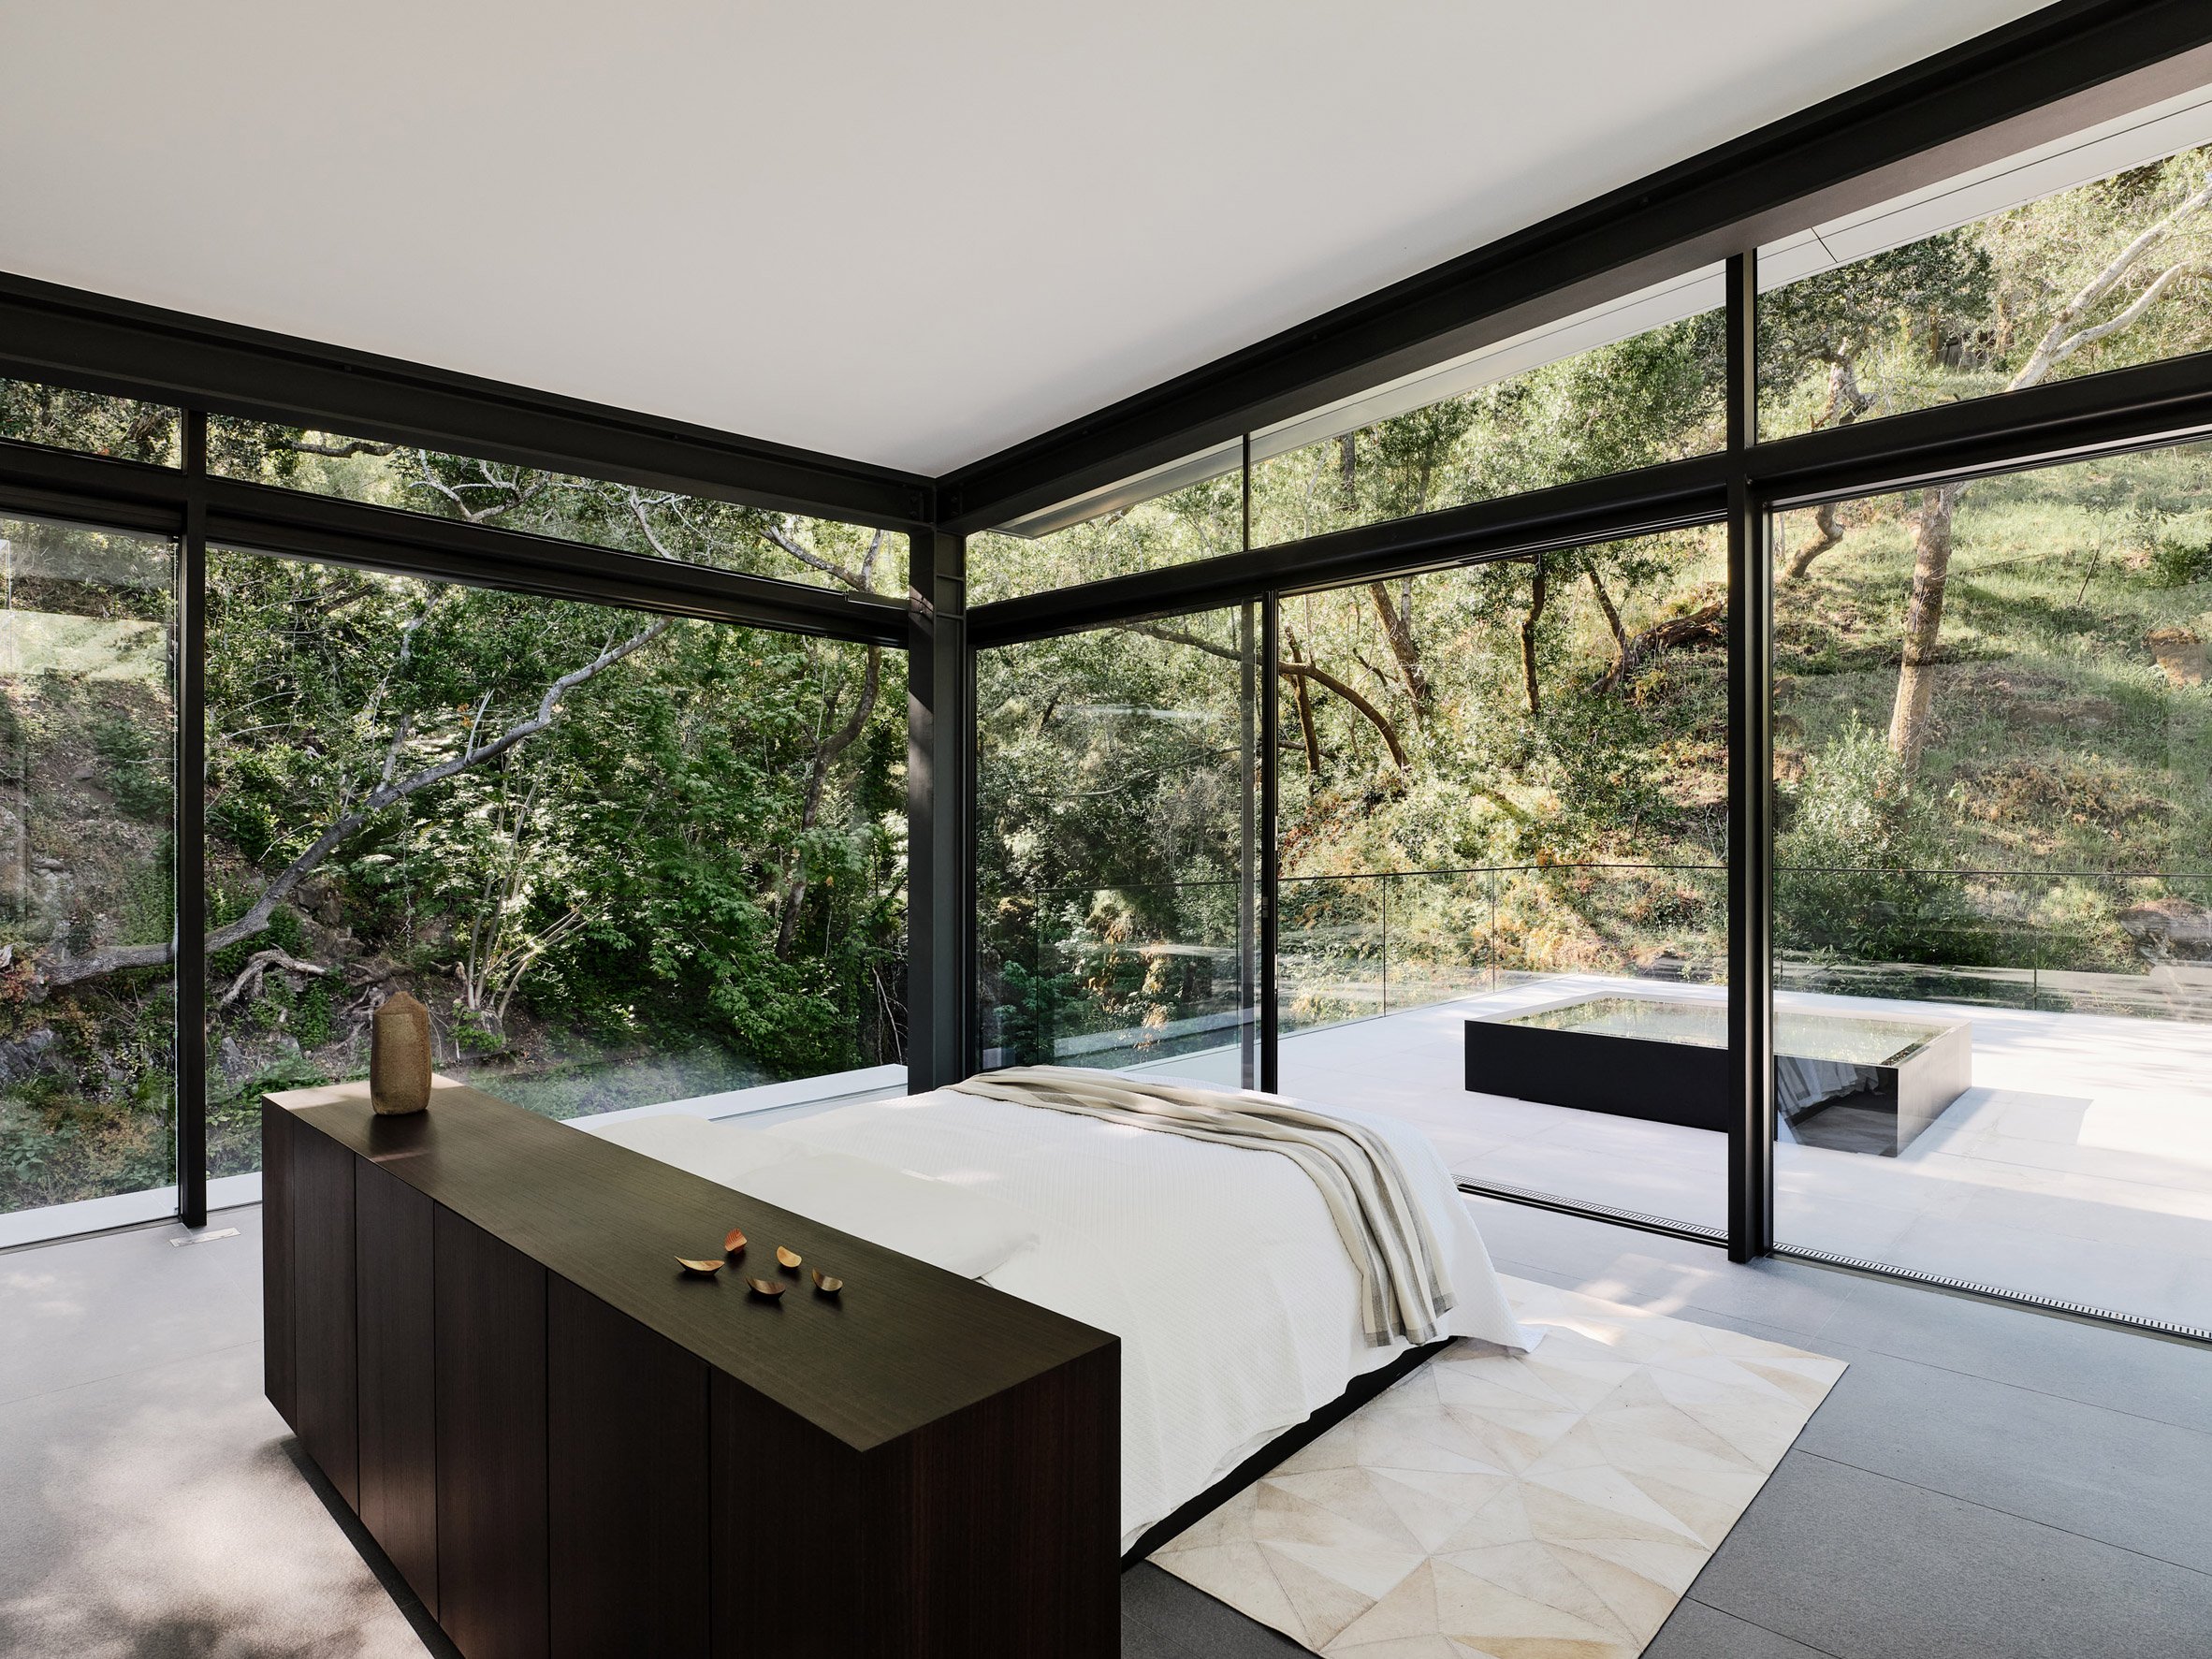 Bedroom in forested creek with panoramic views of surroundings through glass walls